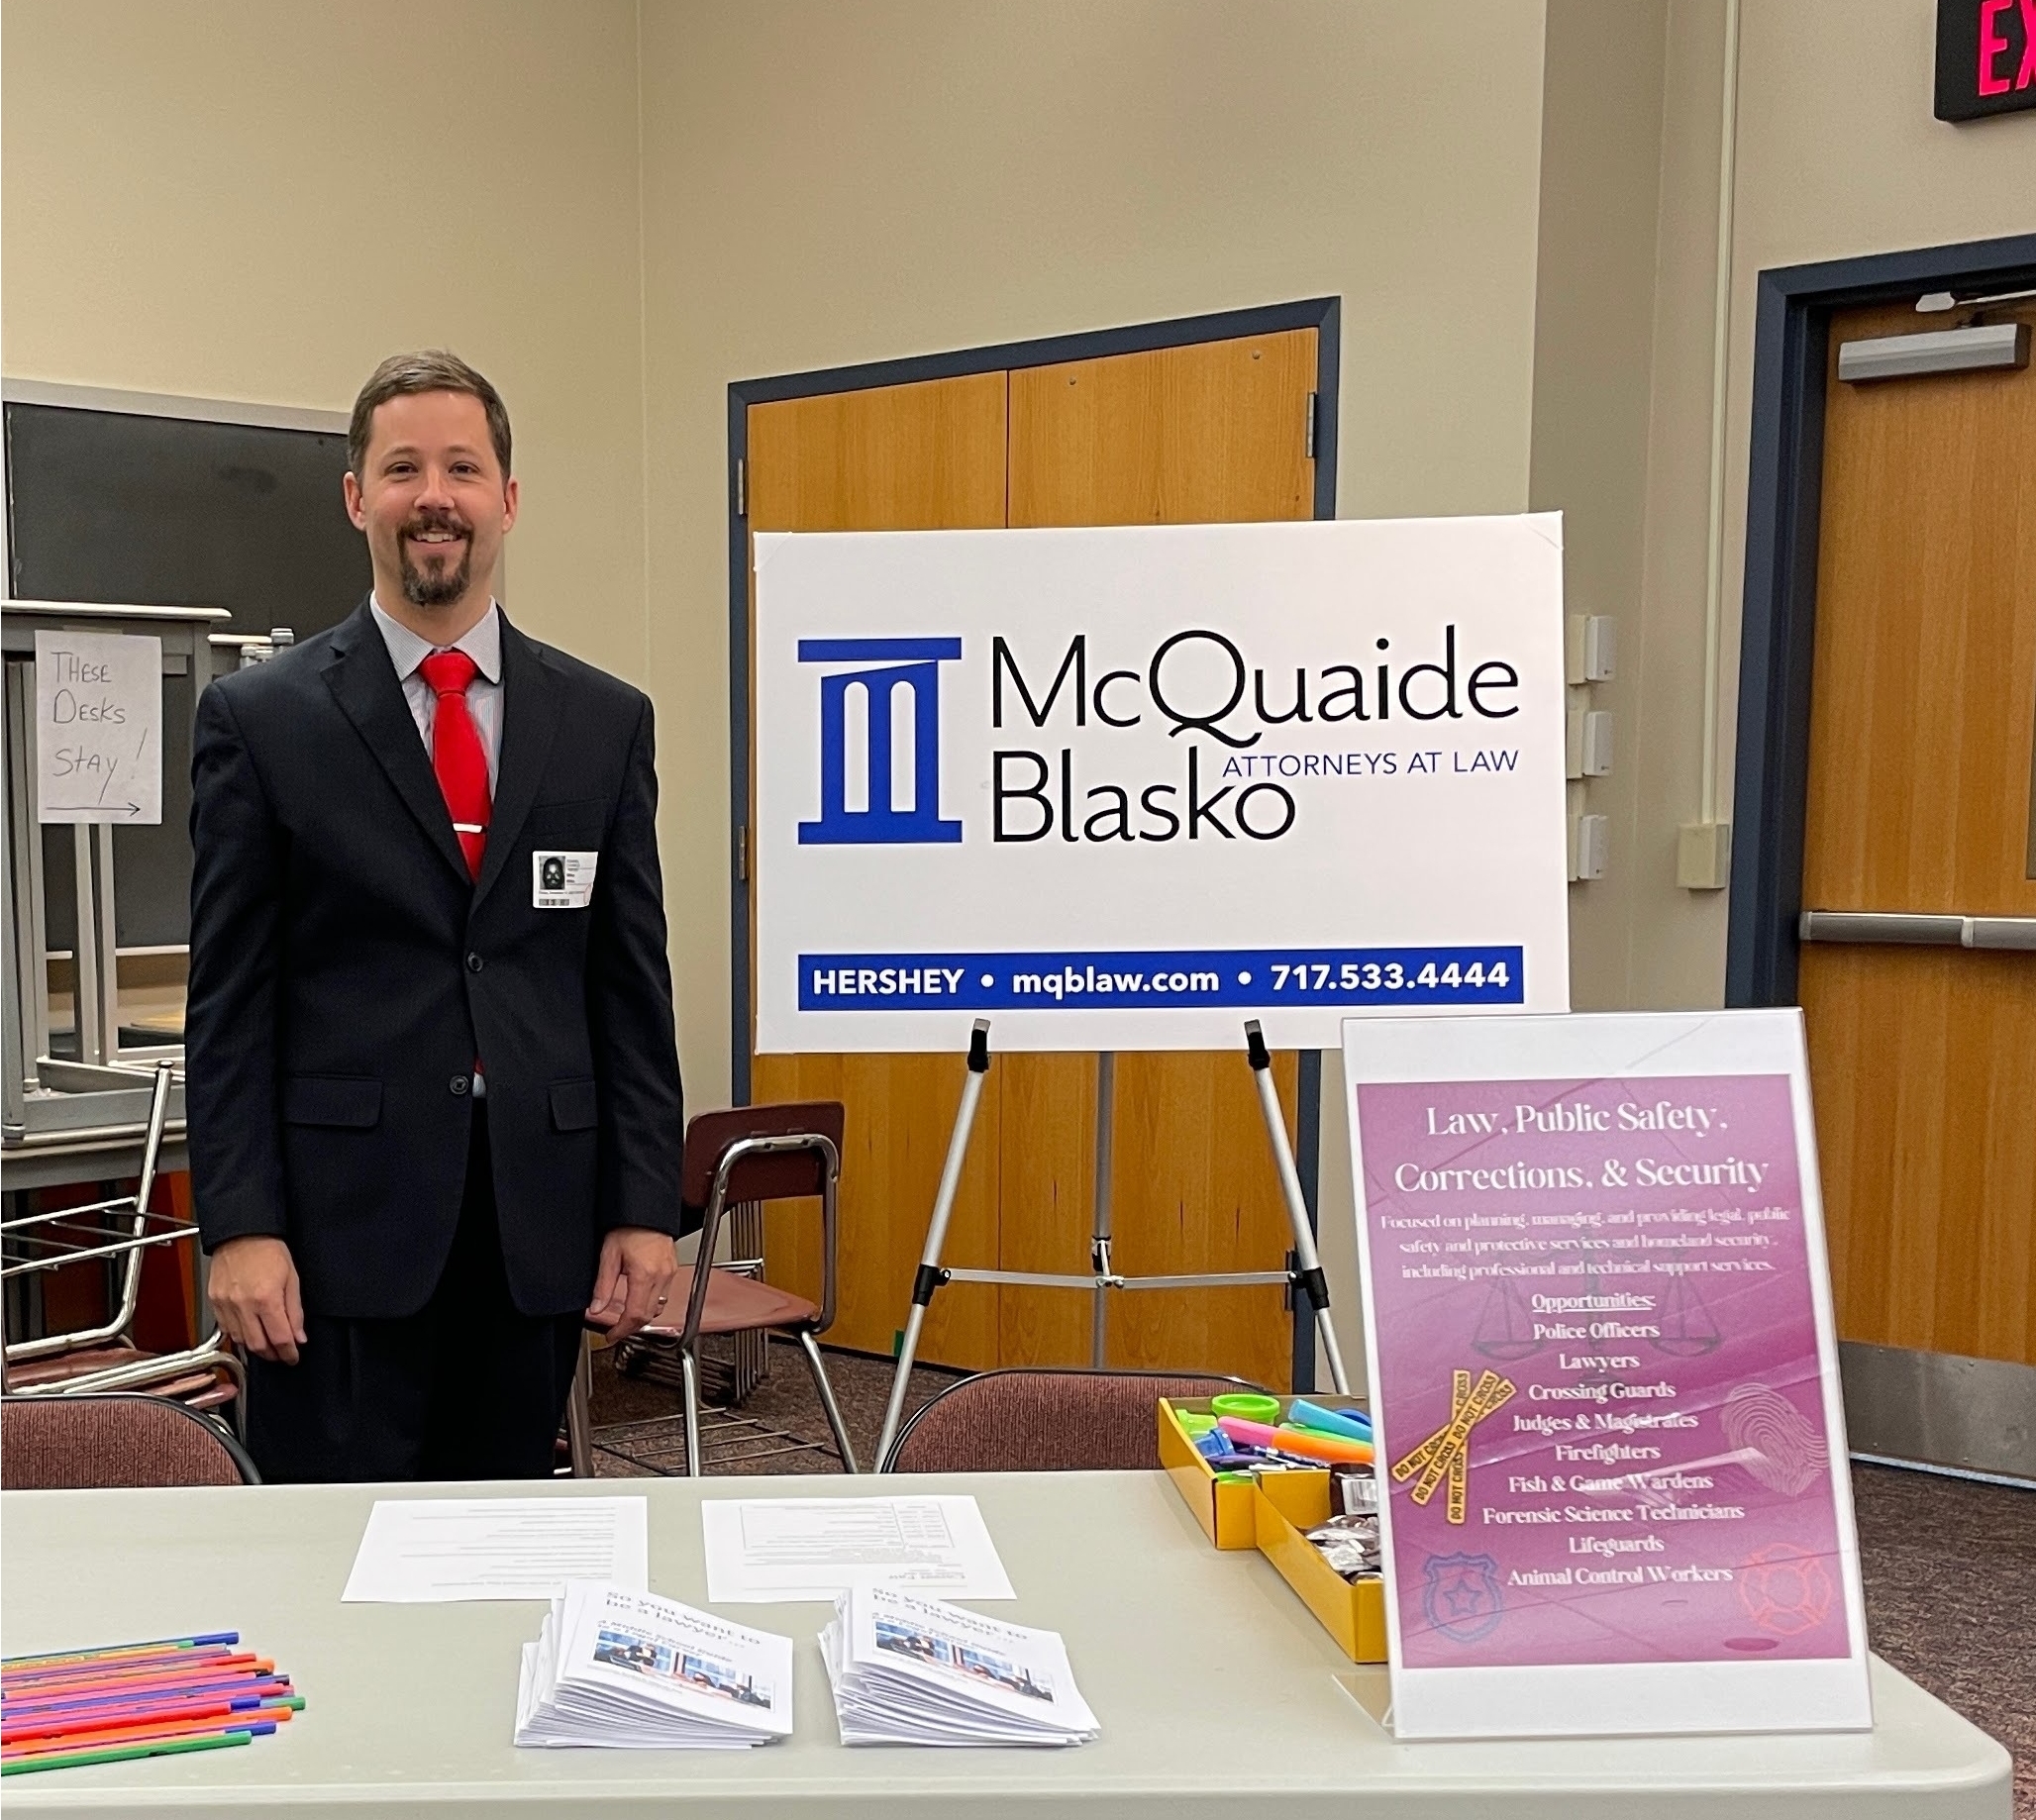 McQuaide Blasko Attorney, Asahel Church attended Career Day at Hershey Middle School on November 18, 2022